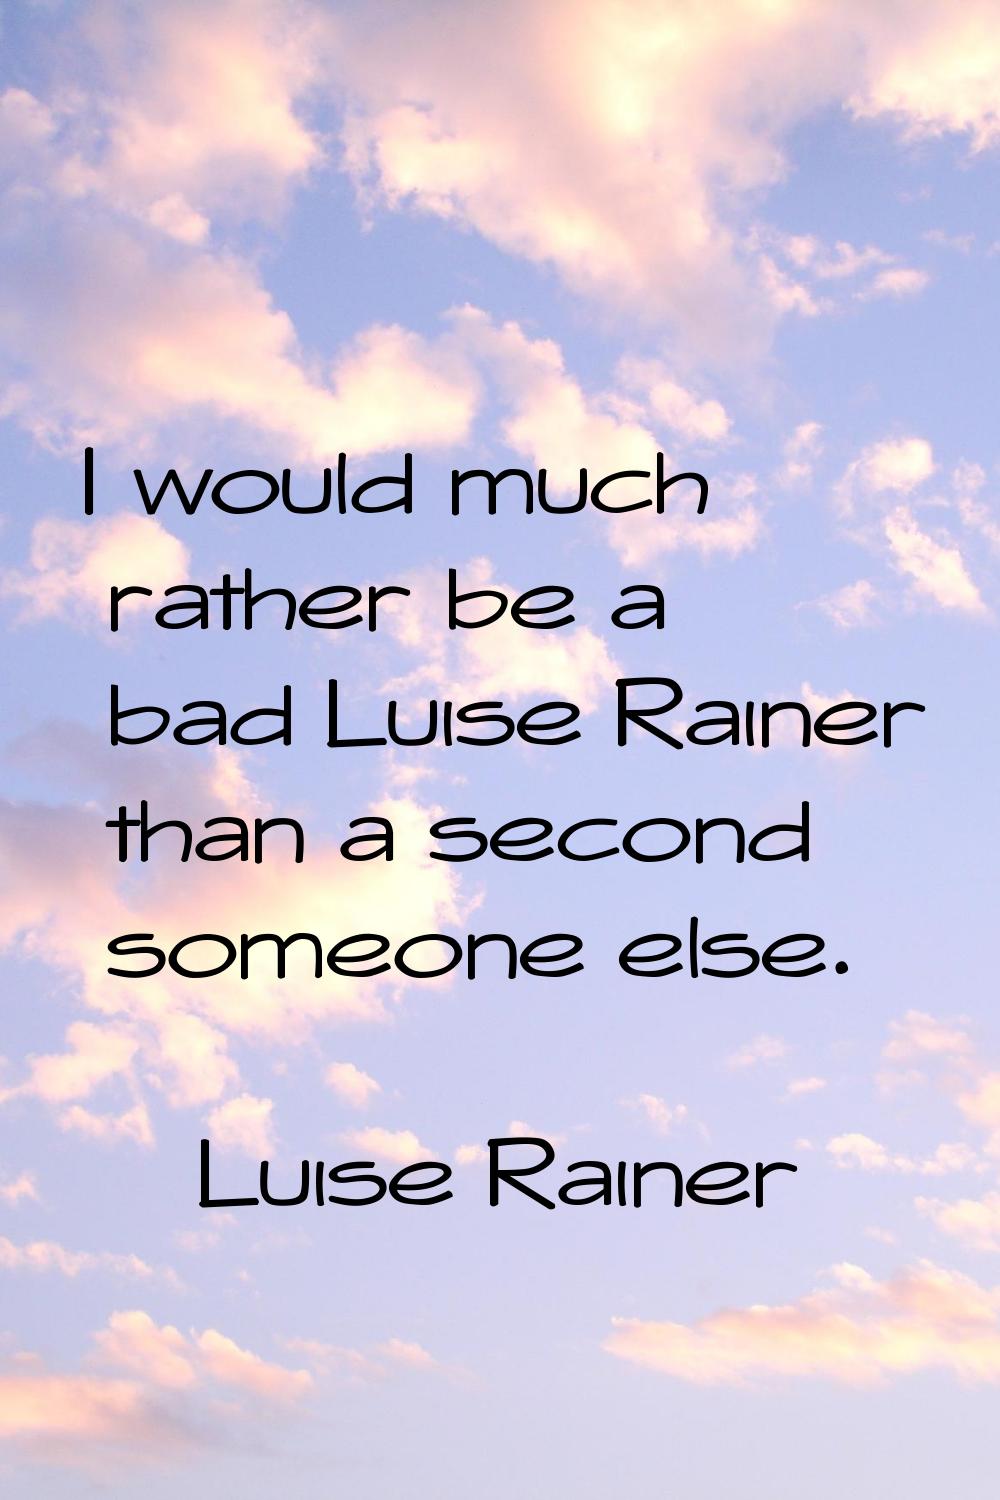 I would much rather be a bad Luise Rainer than a second someone else.